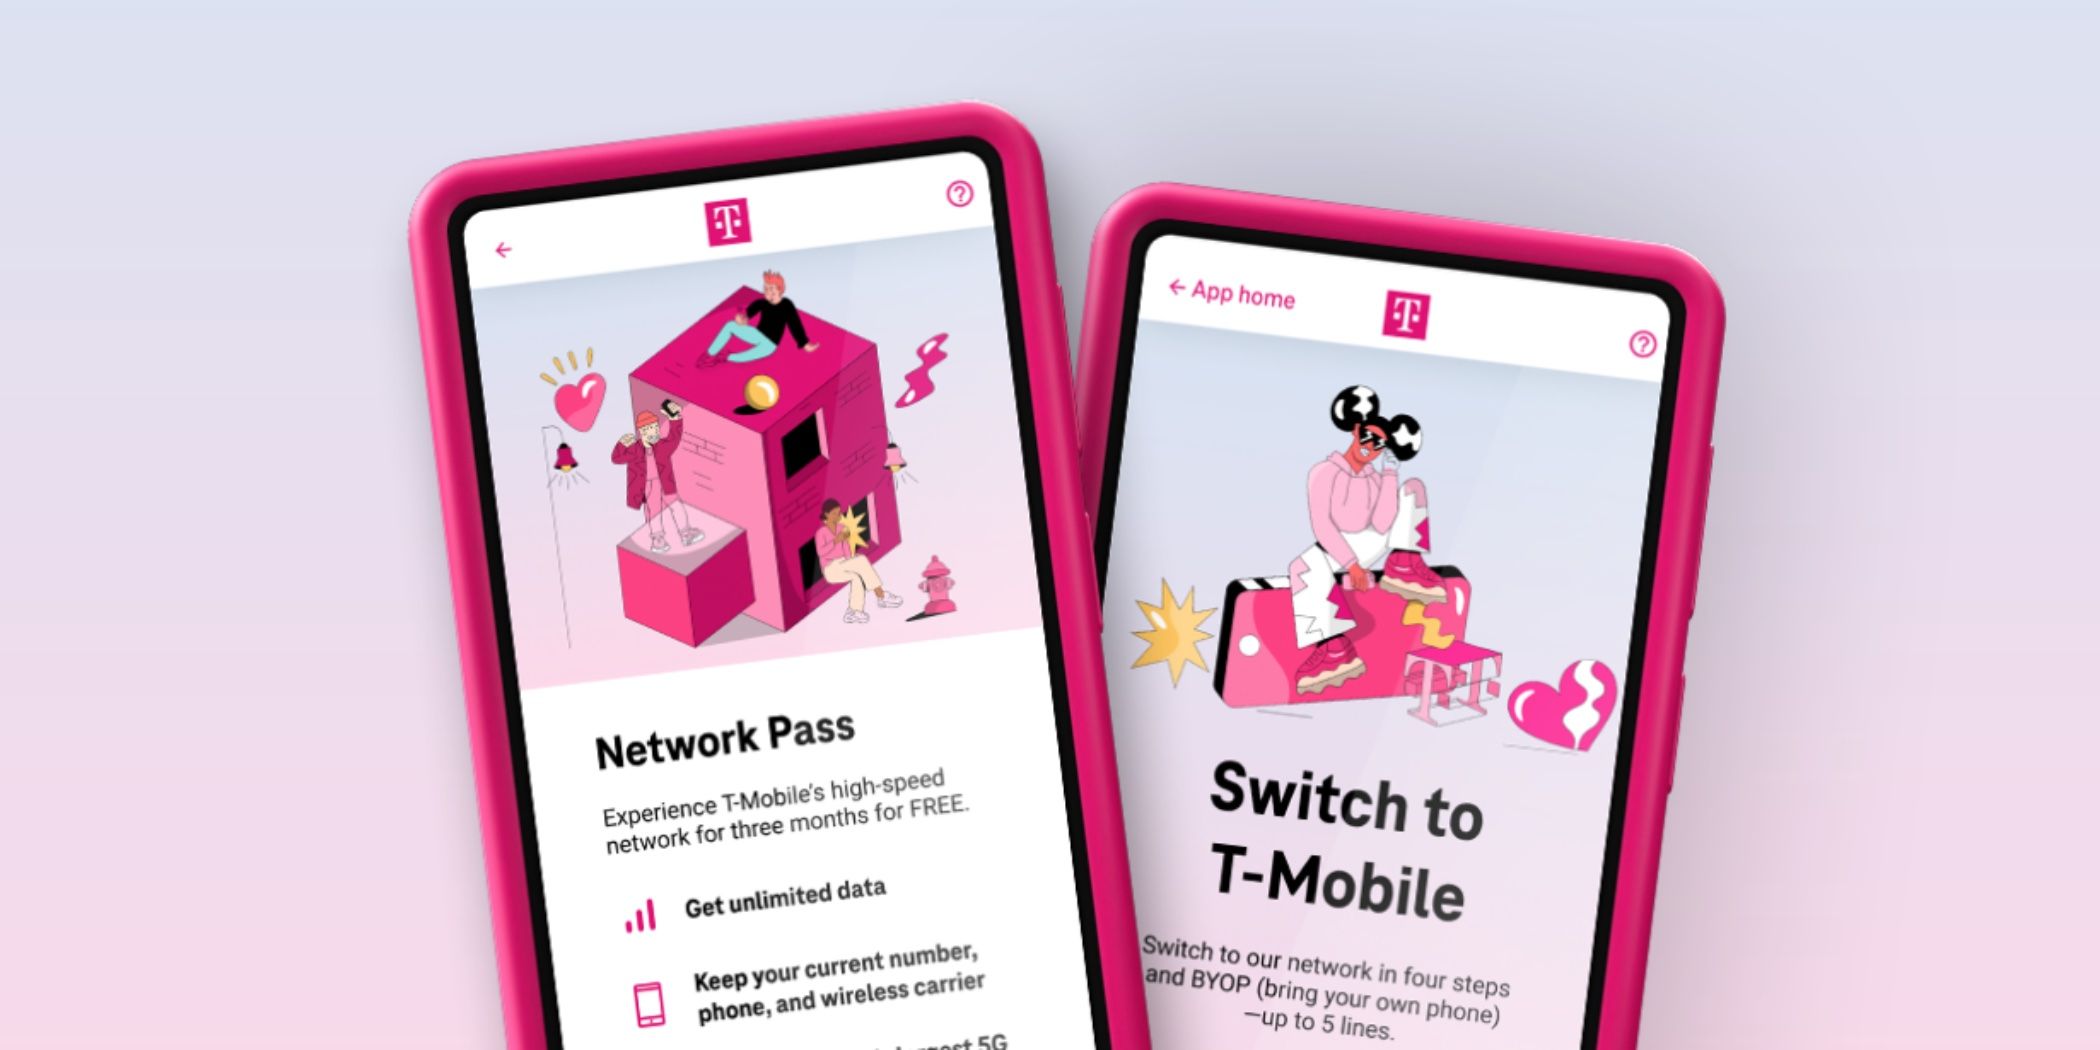 Promotional image for T-Mobile's new Network Pass.